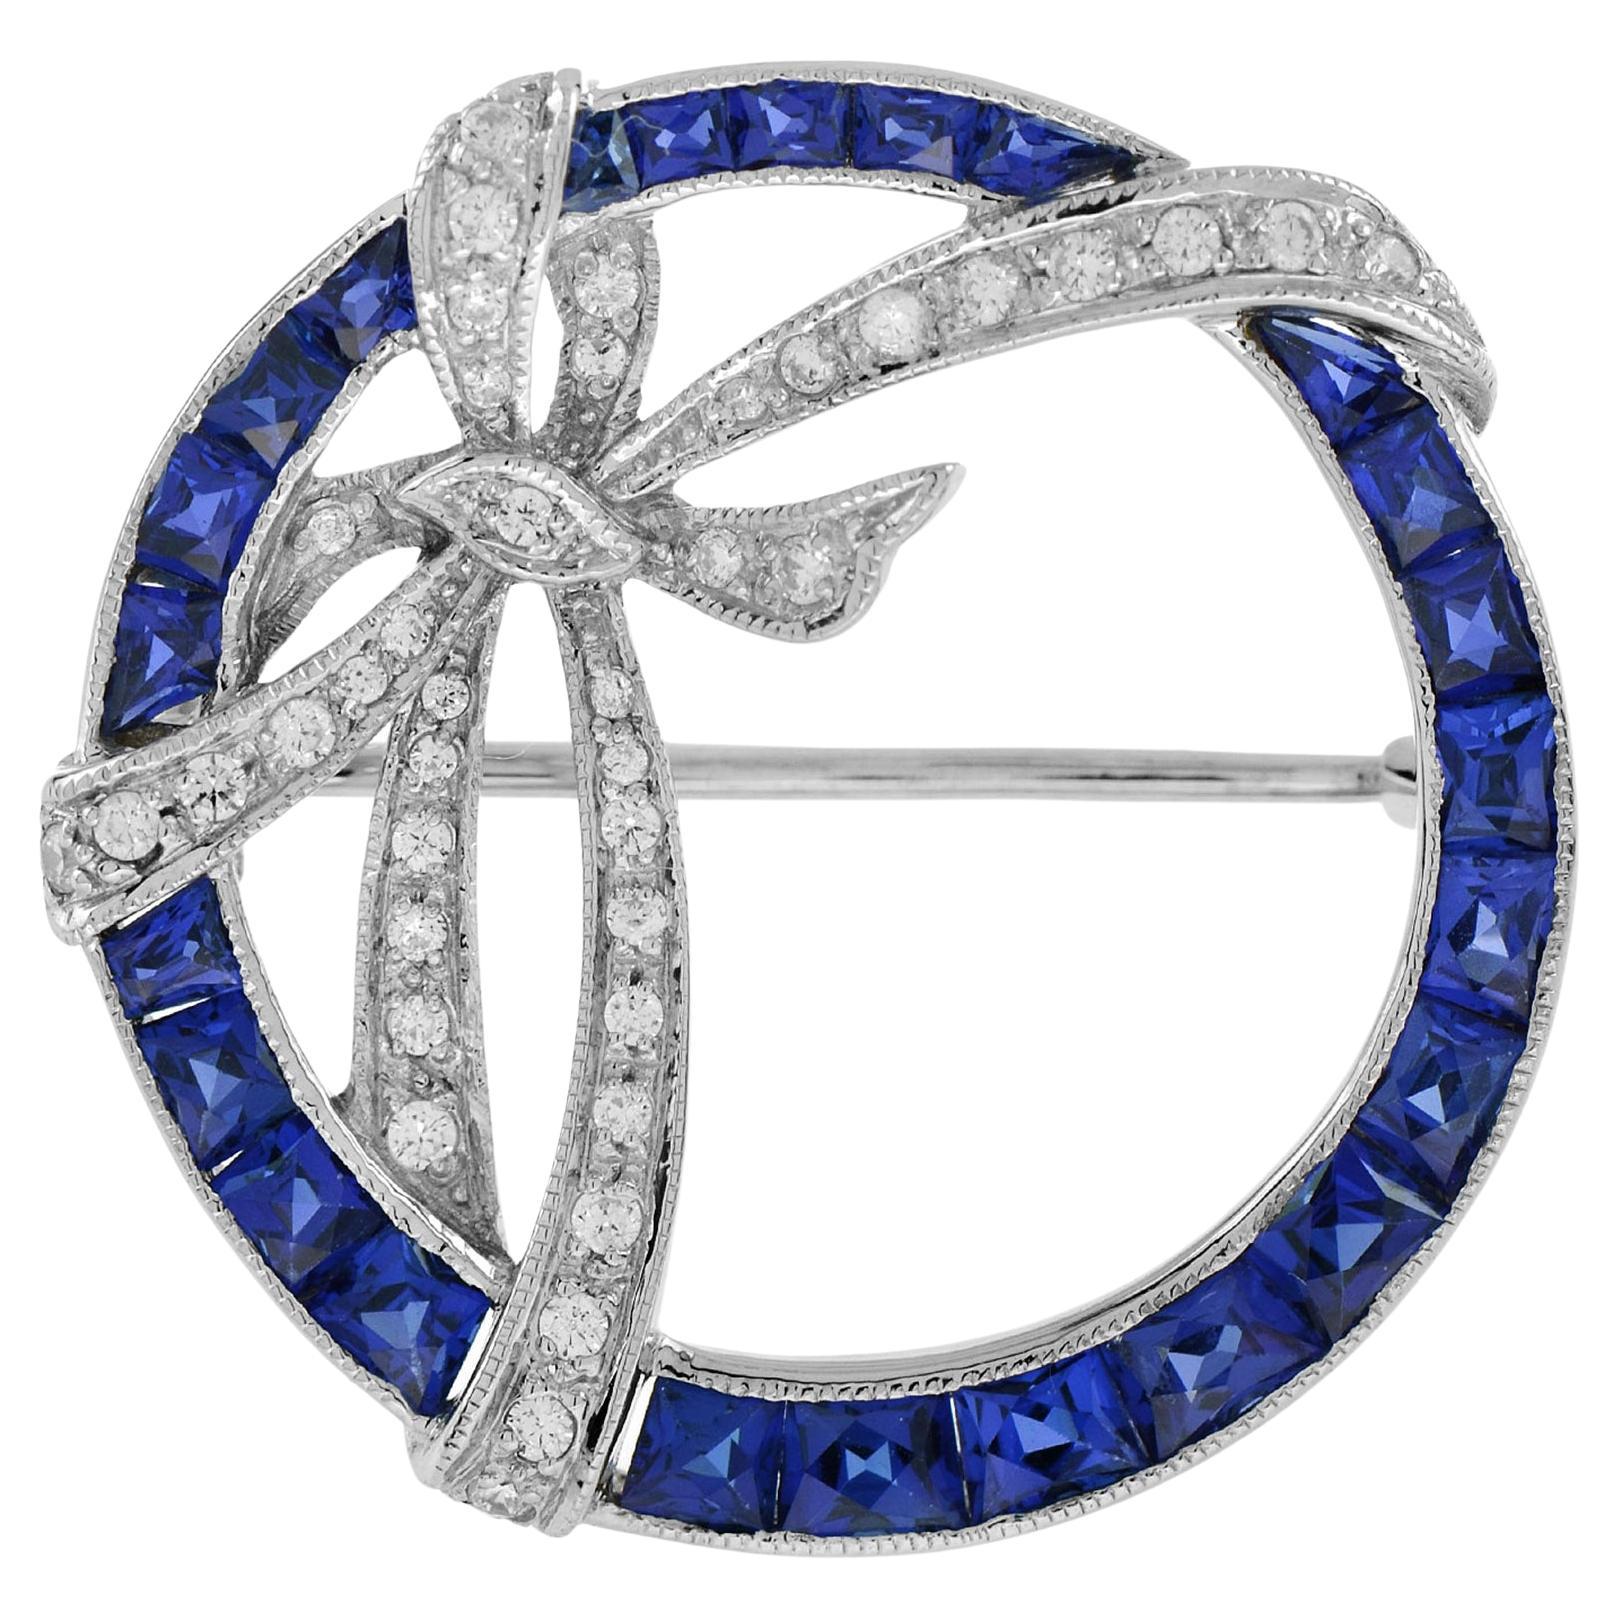 Art Deco Style Circle with Ribbon Sapphire and Diamond Brooch in 14K White Gold